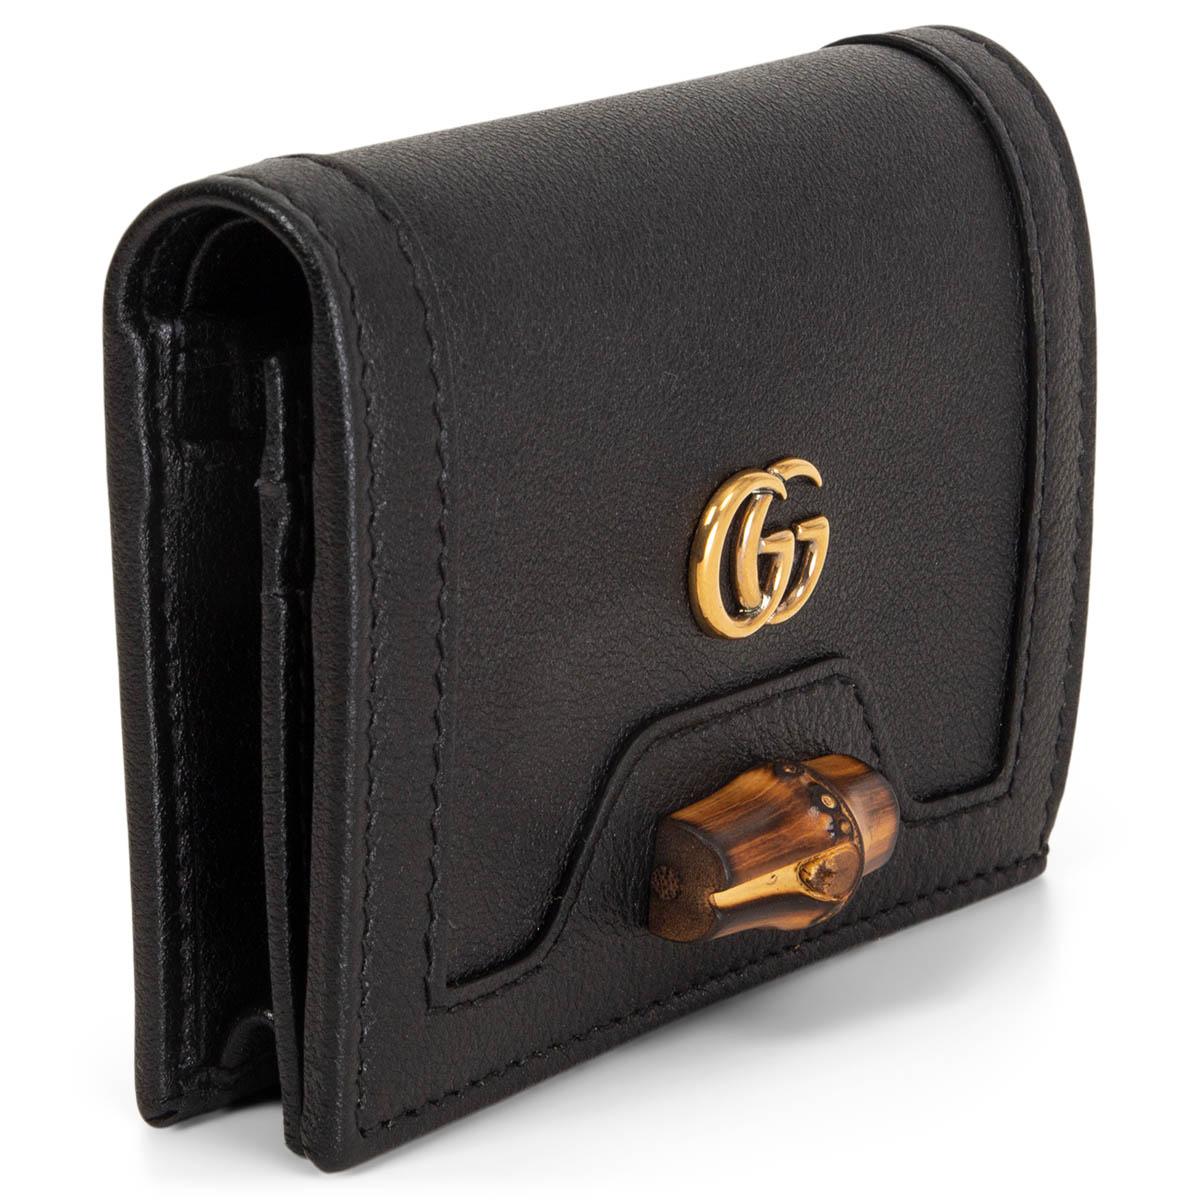 100% authentic Gucci mini wallet in balck calfskin finished with bamboo detailing, this accessory embodies the Italian brand's heritage with an iconic gold-tone GG logo plaque on the front. Opens with a push-buttons and is lined in black nylon.